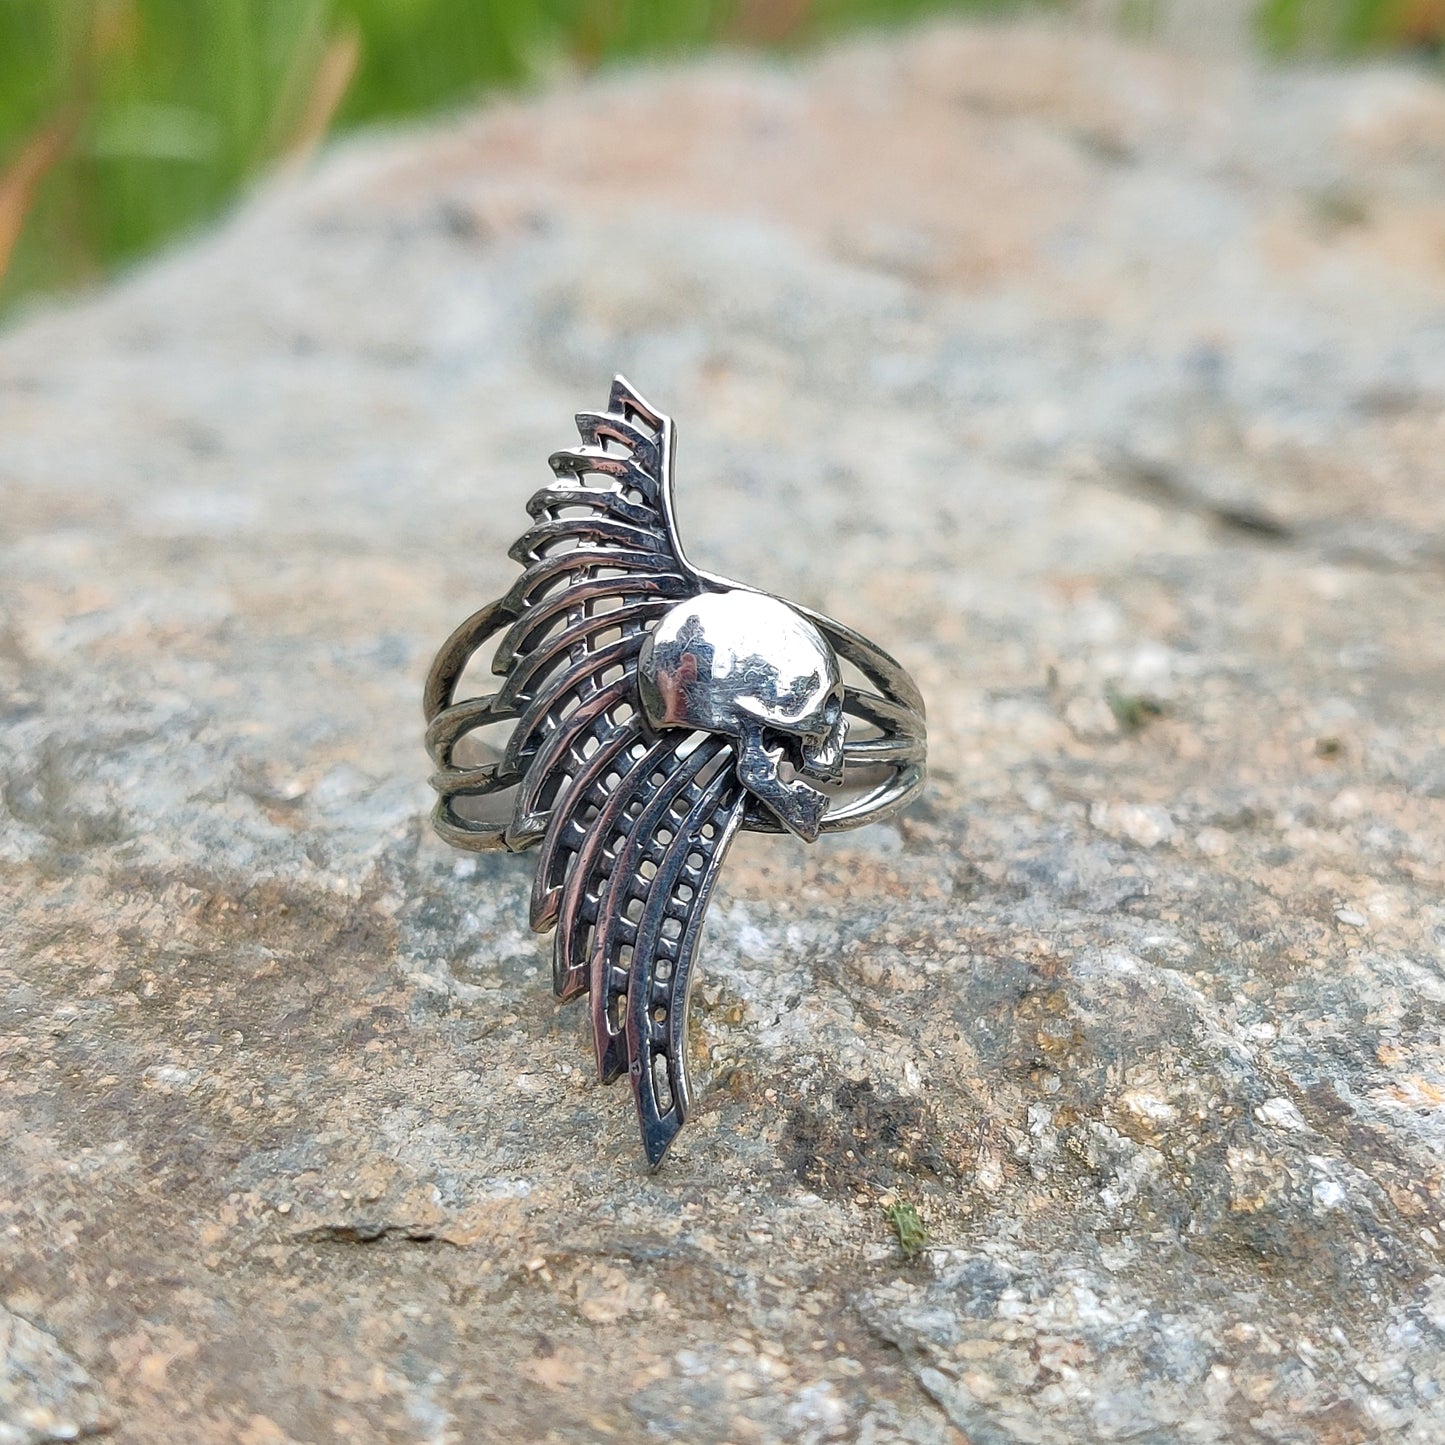 Skull and Wing Ring